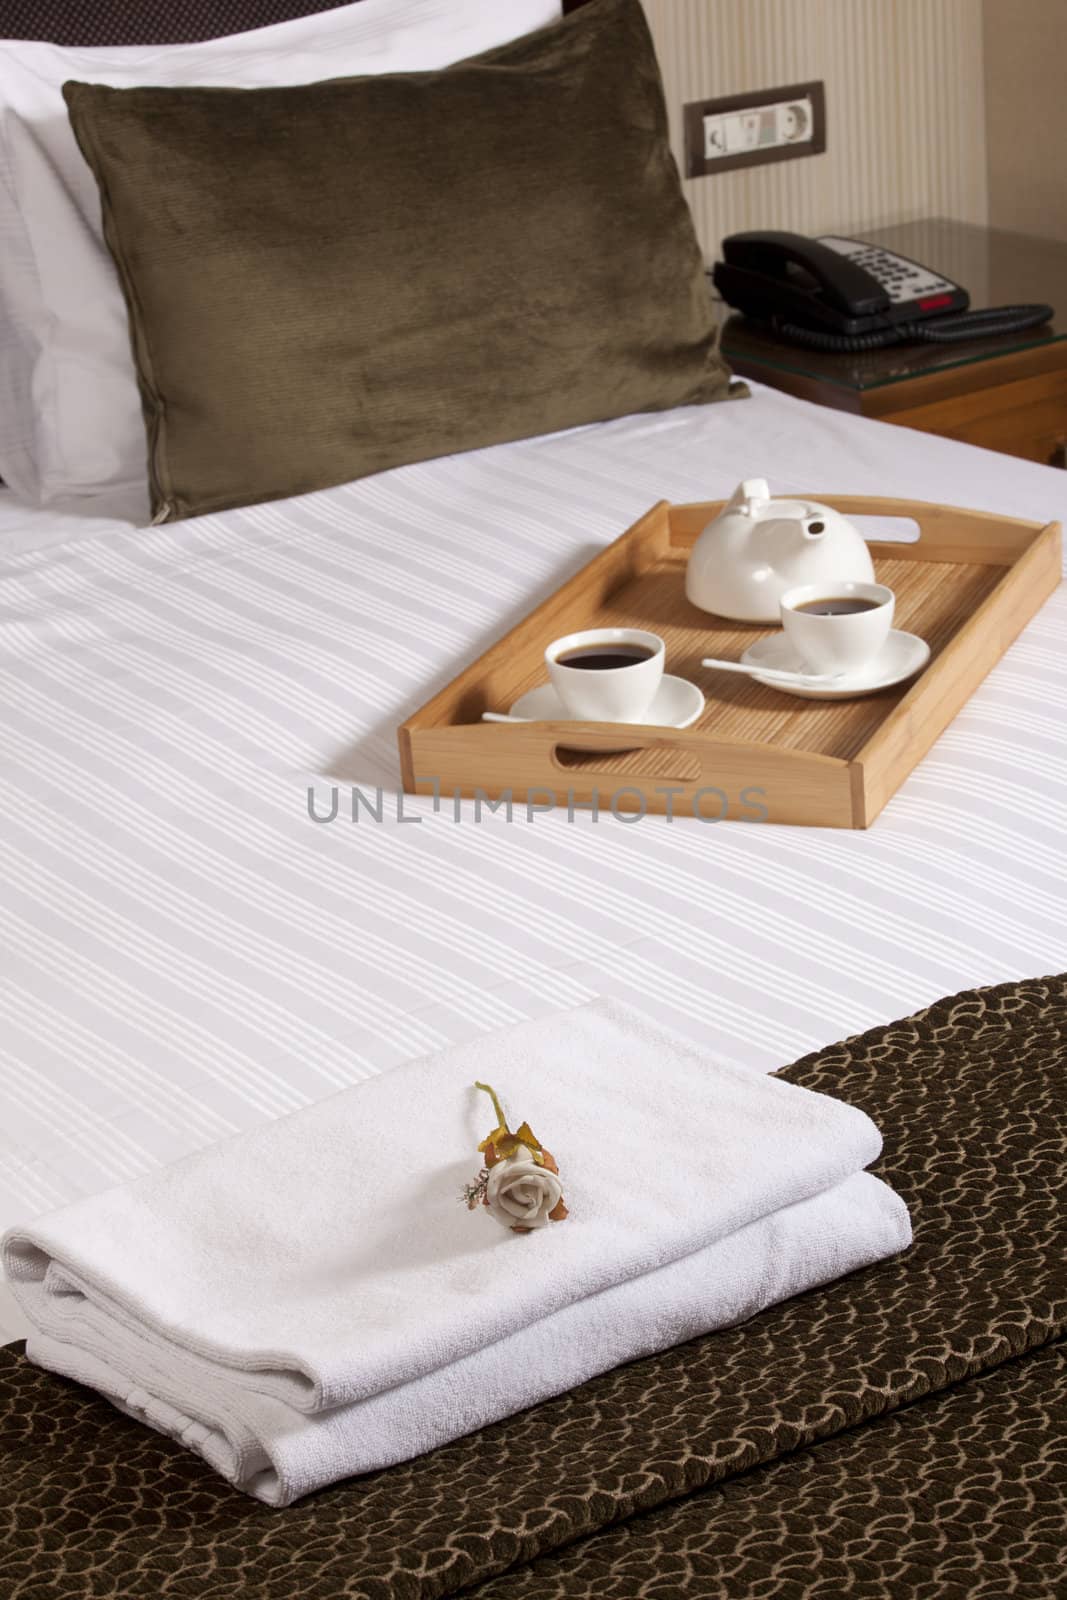 Tray with coffee on a bed in a hotel room